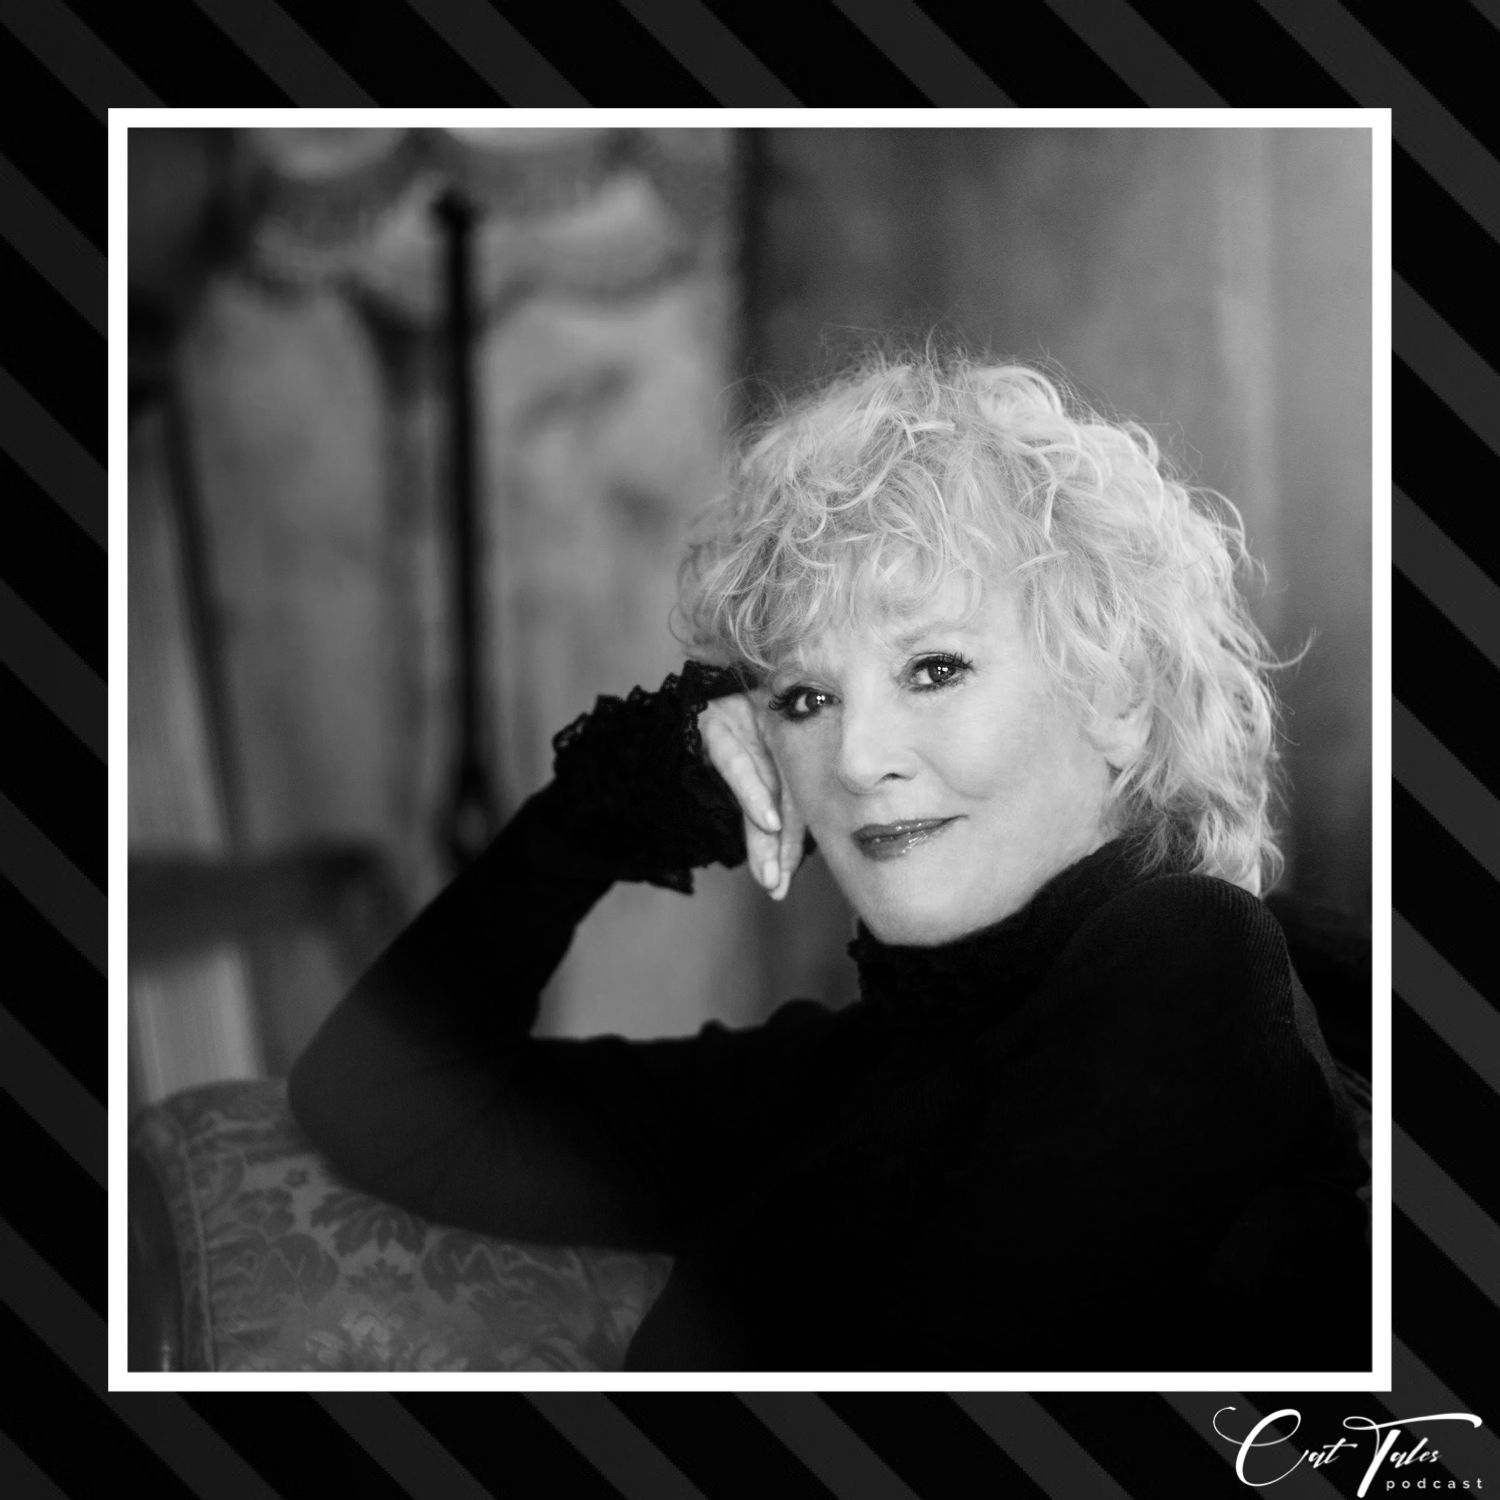 95: The one with Petula Clark